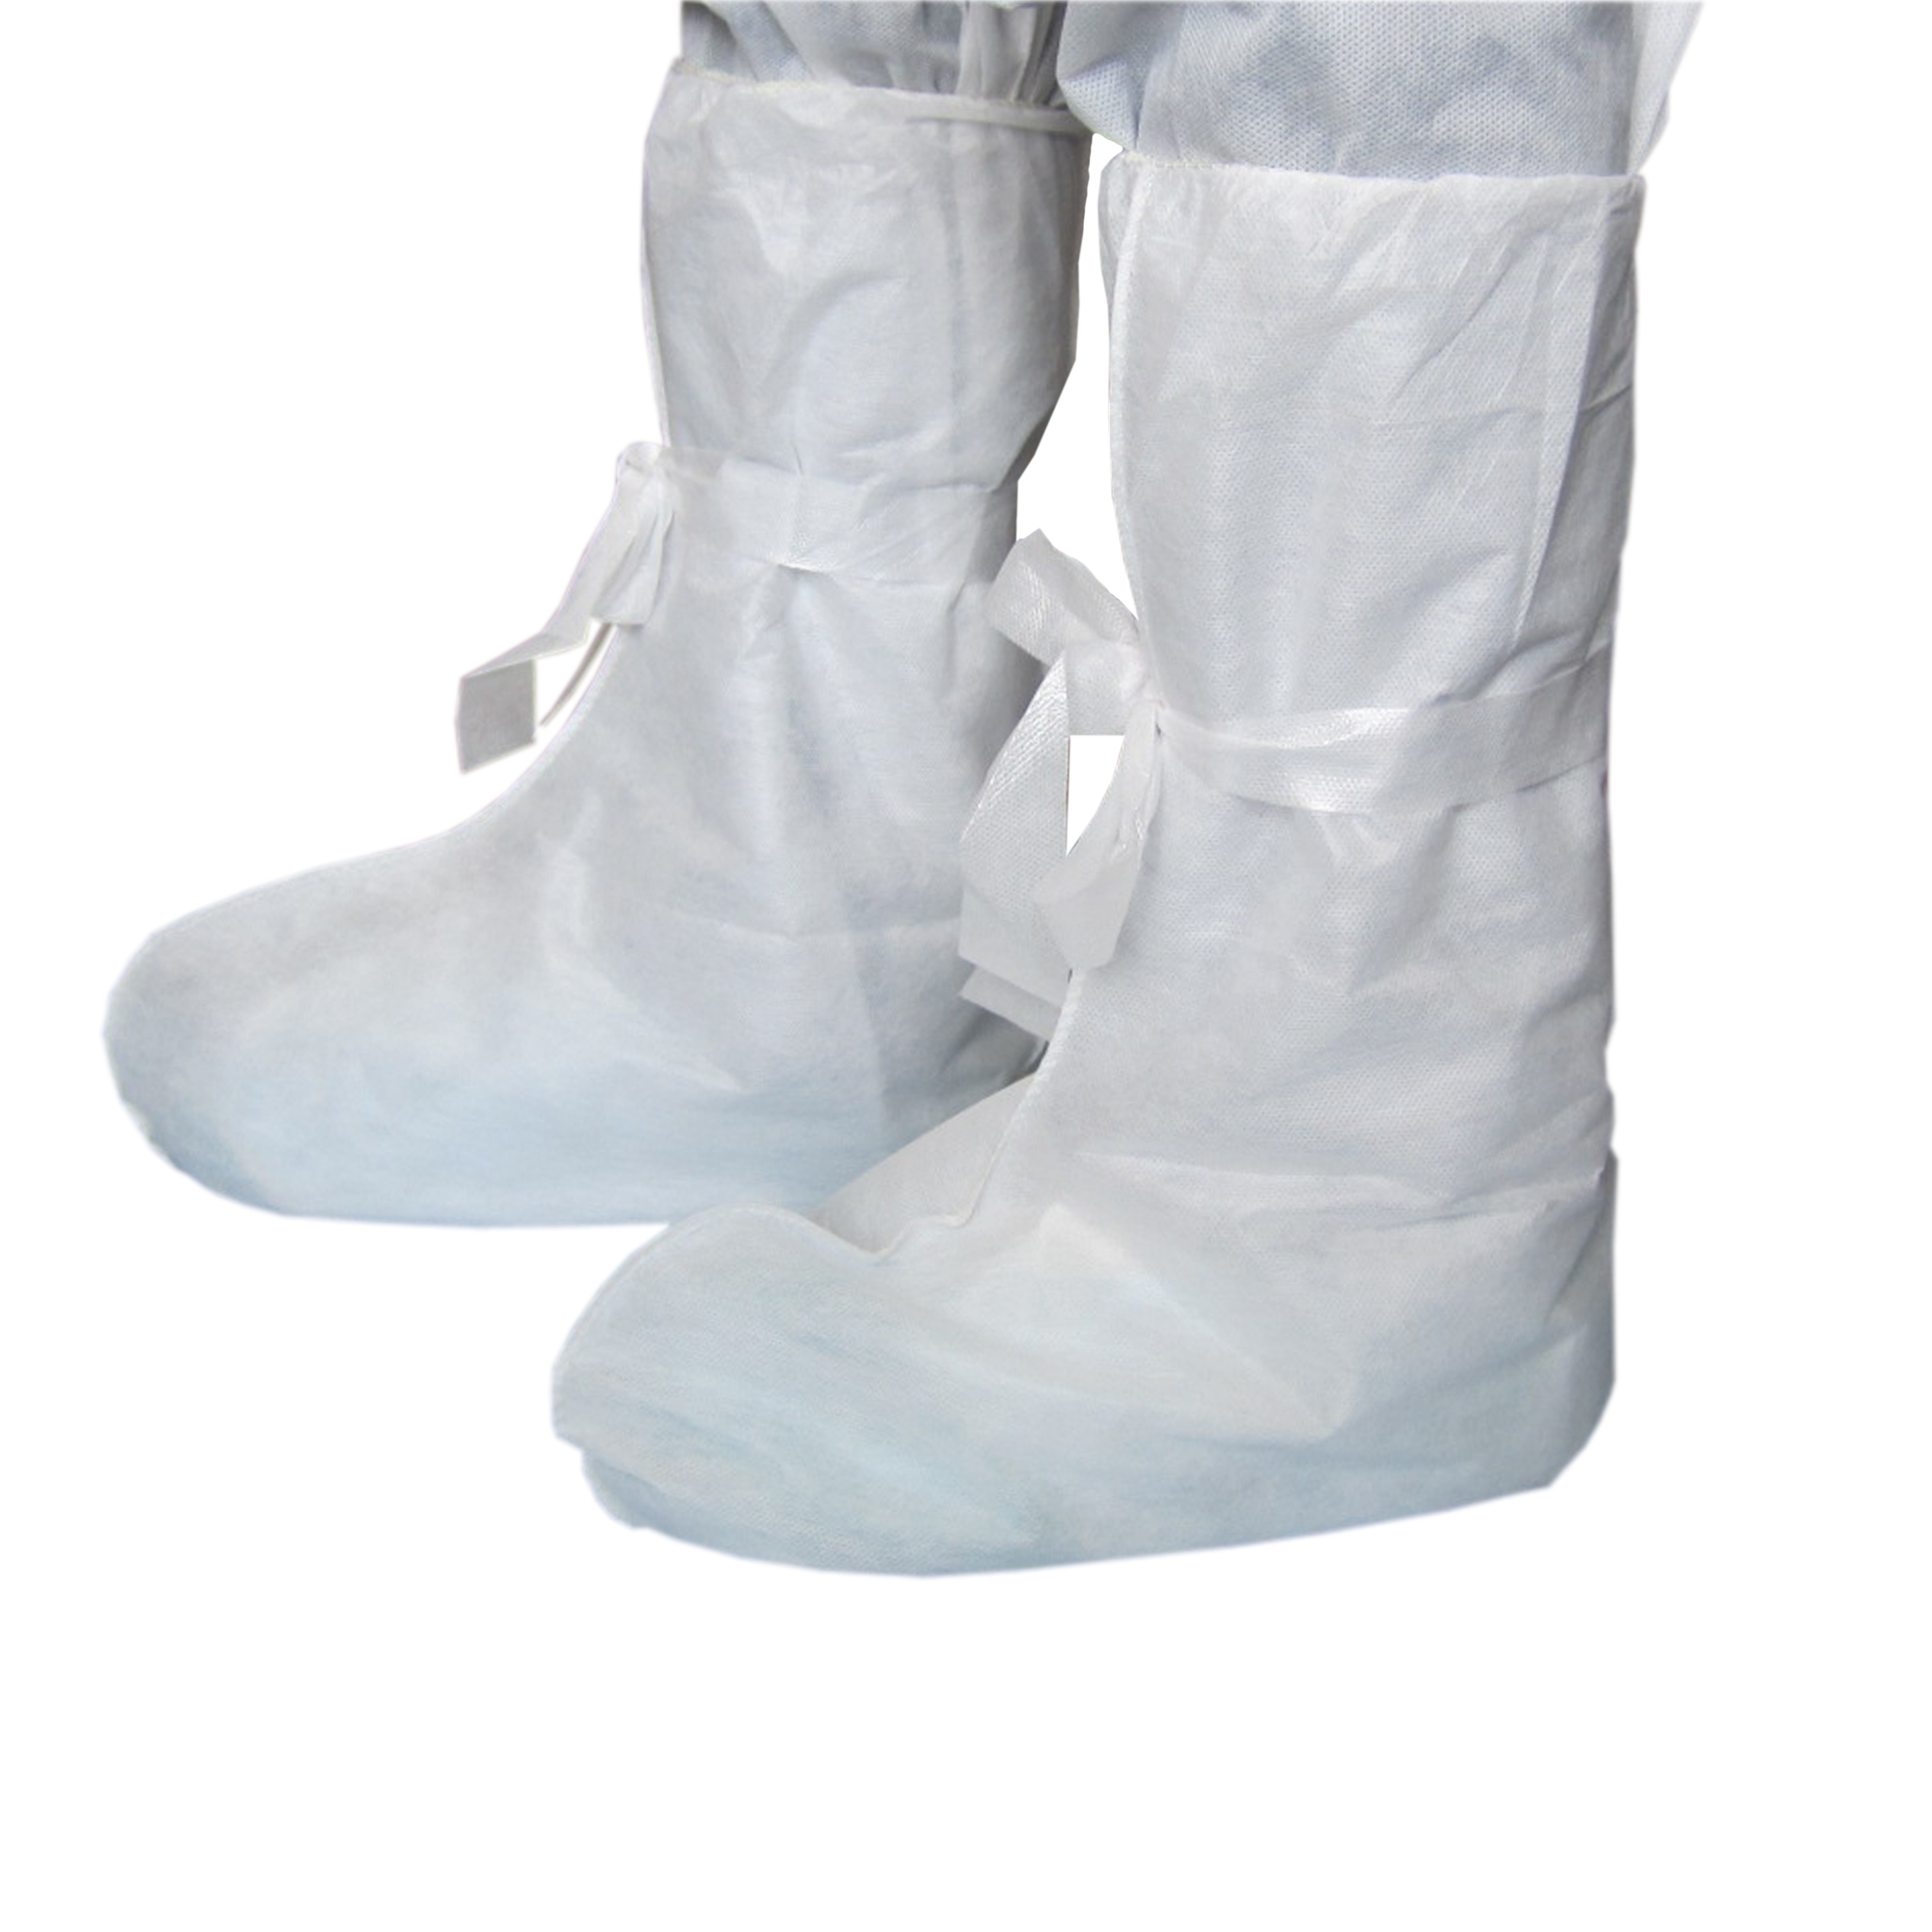 Disposable Boot Cover with Elastic